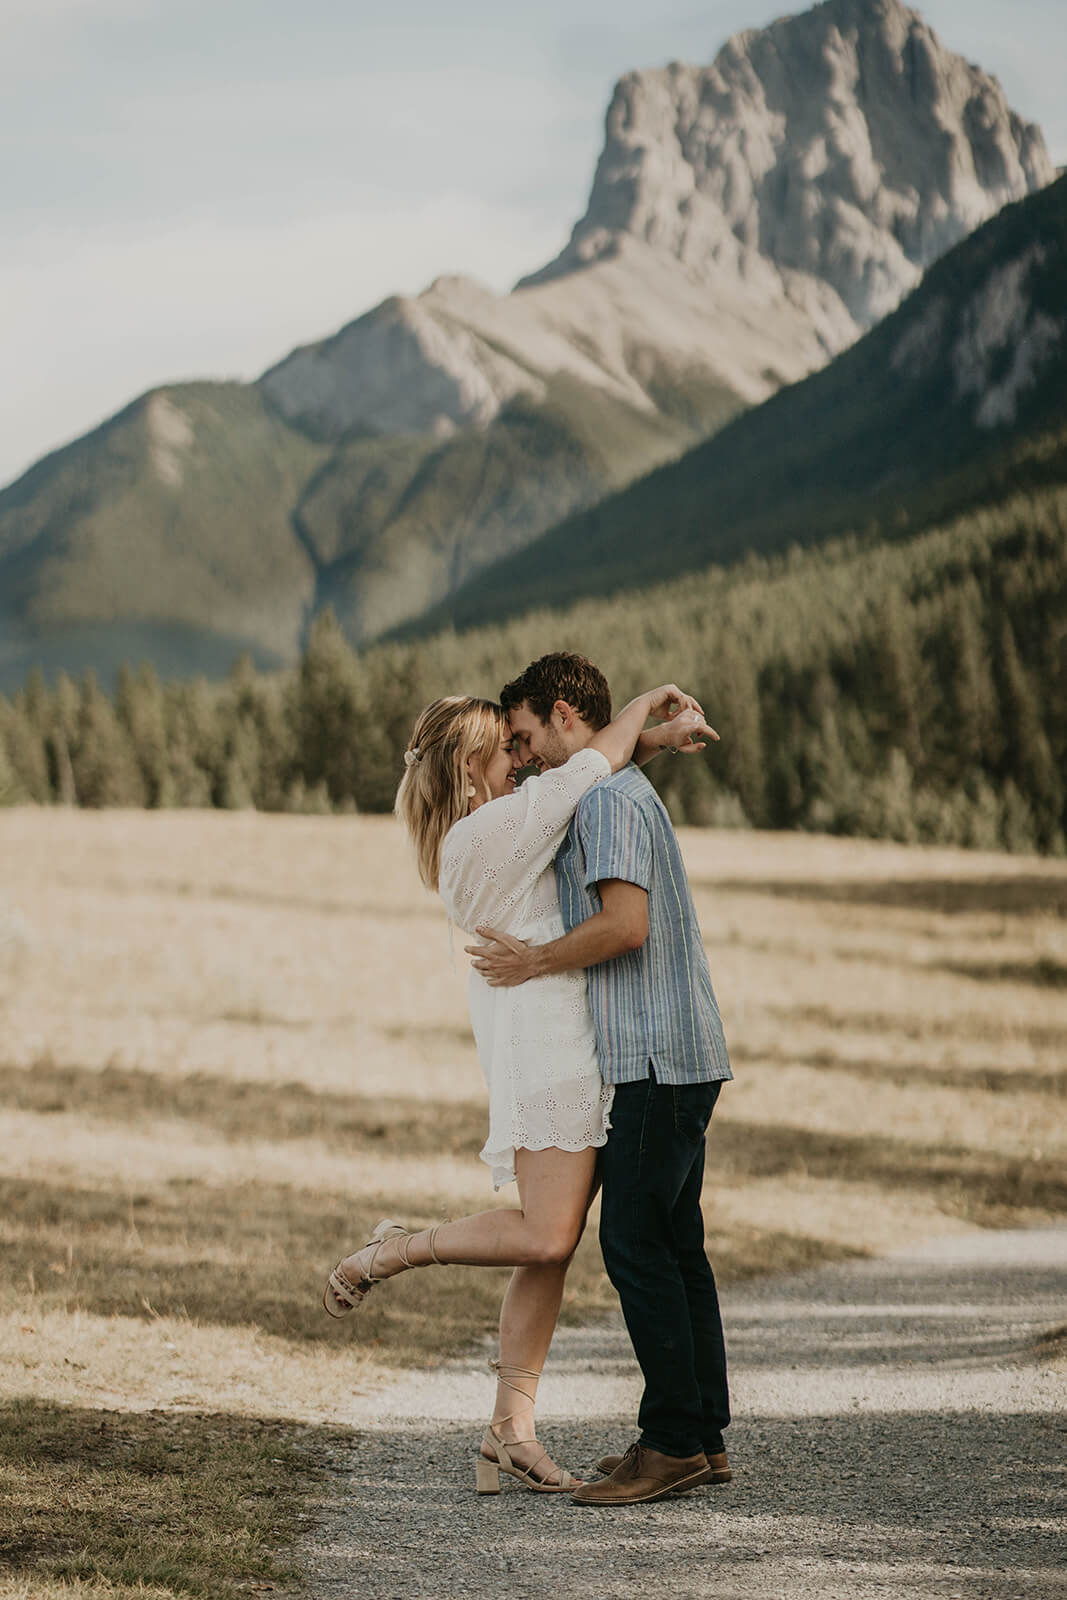 A couple dancing with pine trees and mountains in the background.